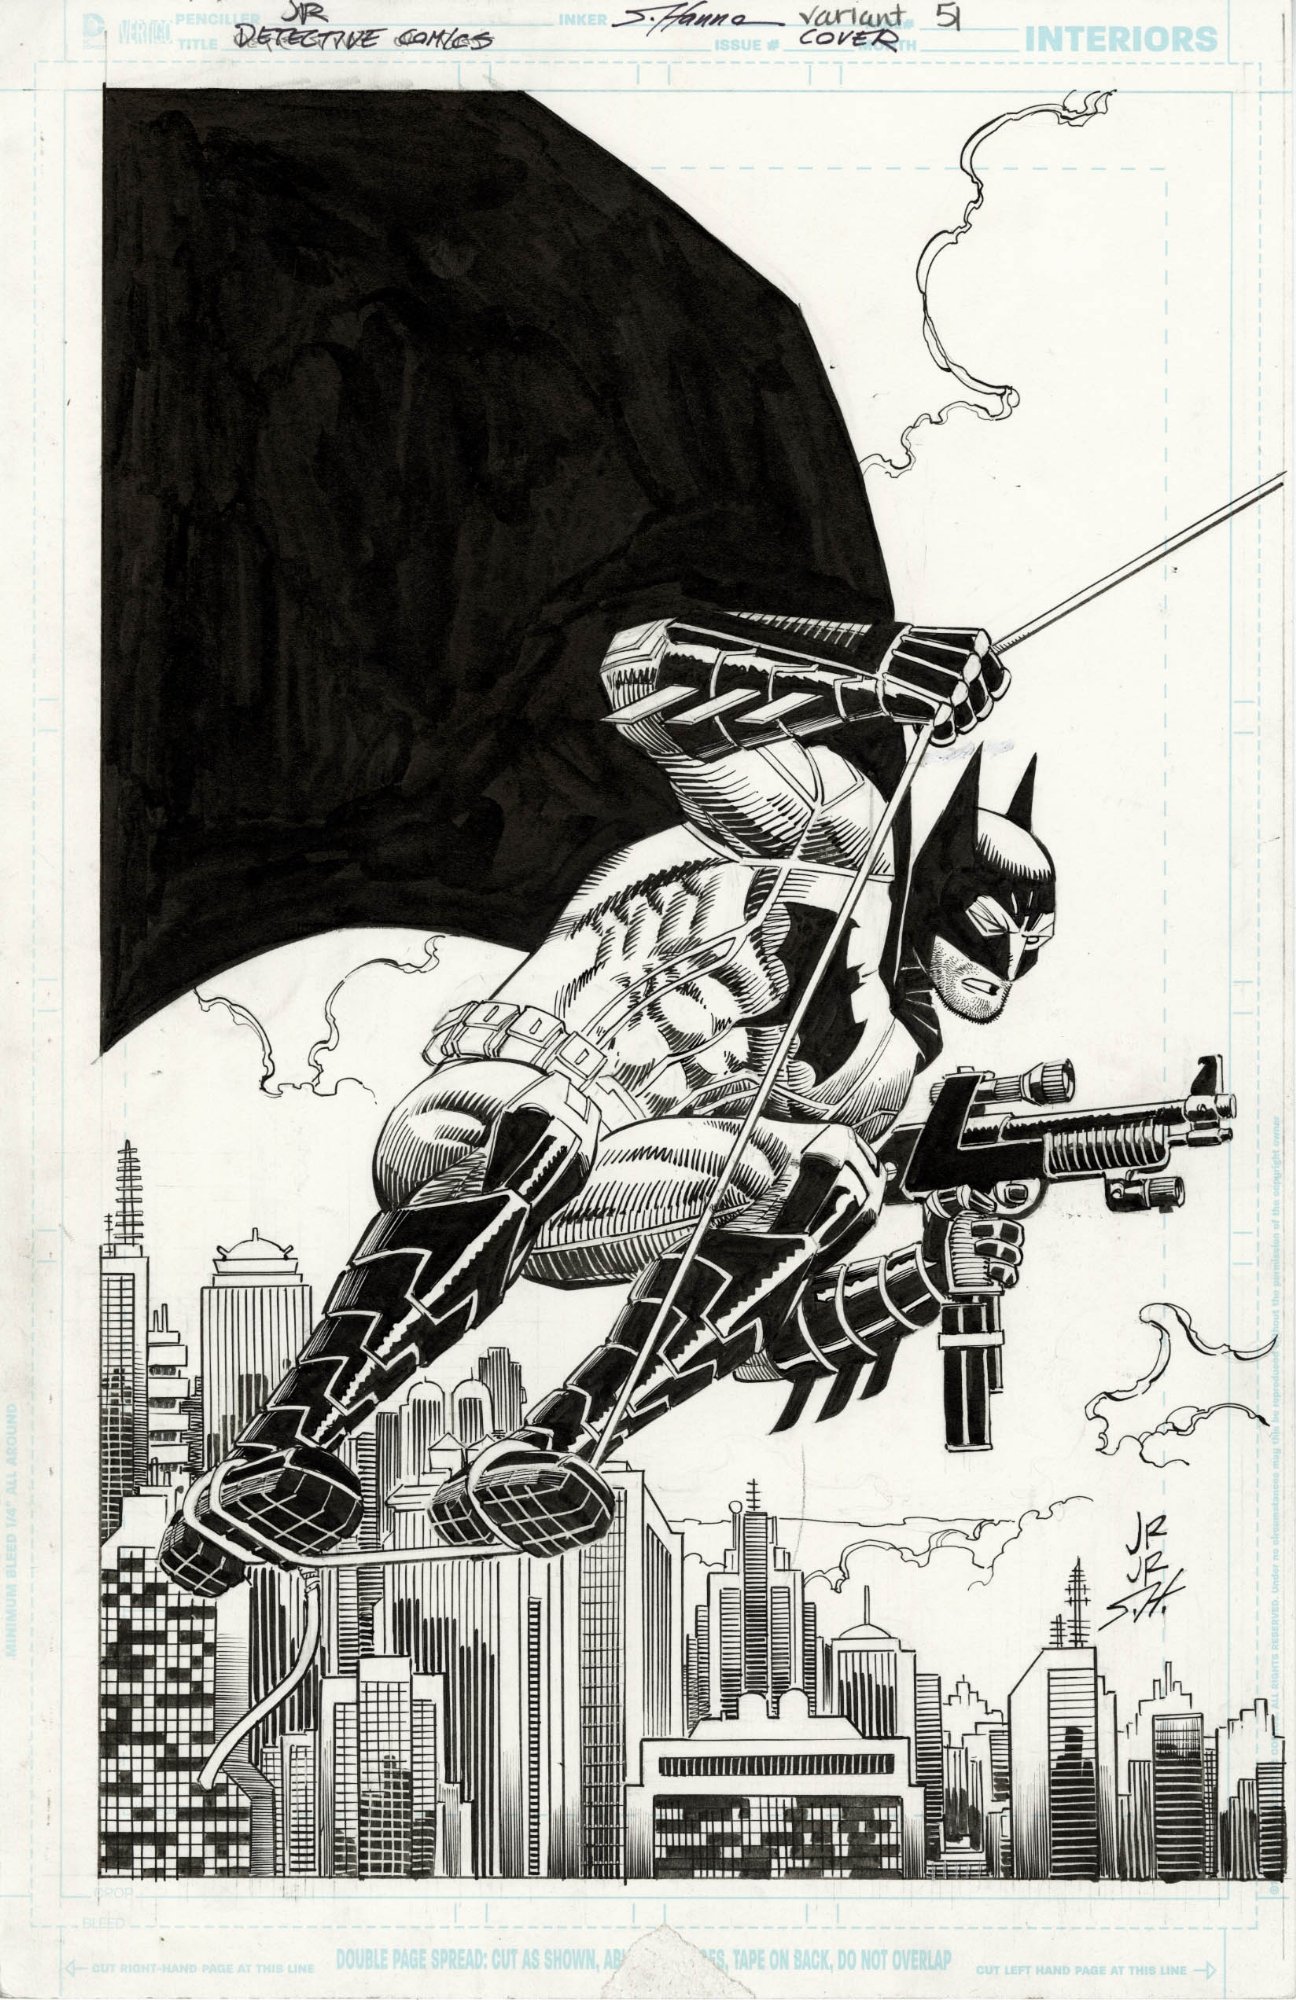 DETECTIVE COMICS #51 VARIANT COVER ( 2016, JOHN ROMITA JR. ) BATMAN: ARMED  AND DANGEROUS, in  Auctions's CLOSED FEATURED AUCTION  HIGHLIGHTS - 08/2019 Comic Art Gallery Room